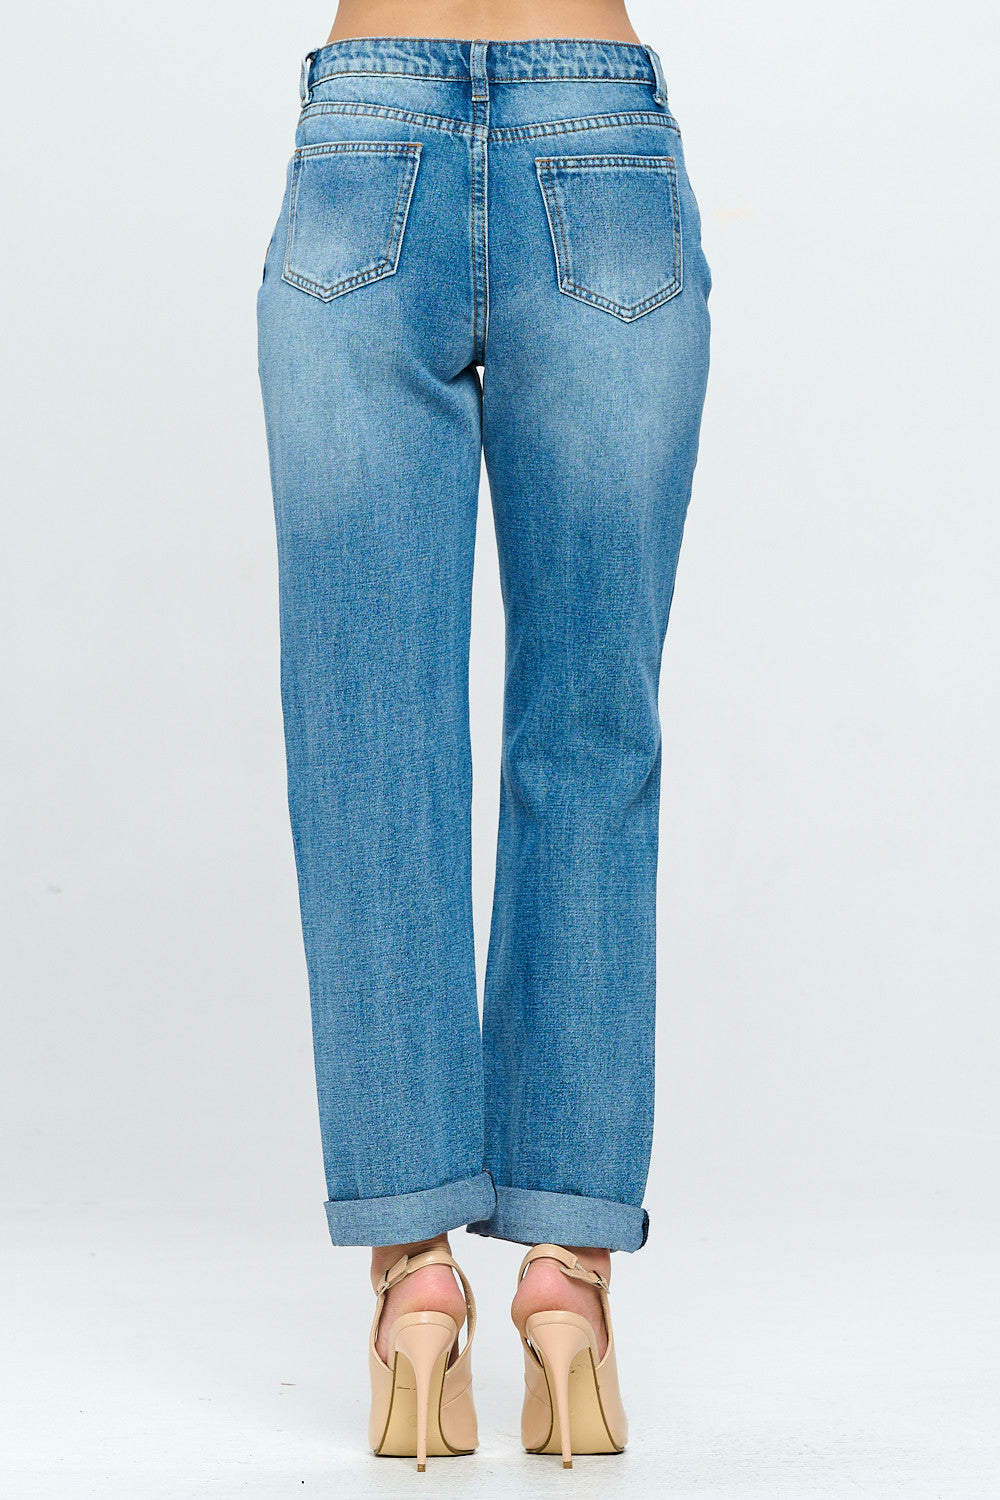 90's Style Mid Rise Mom Jean Rolled Cuff Medium DH2108